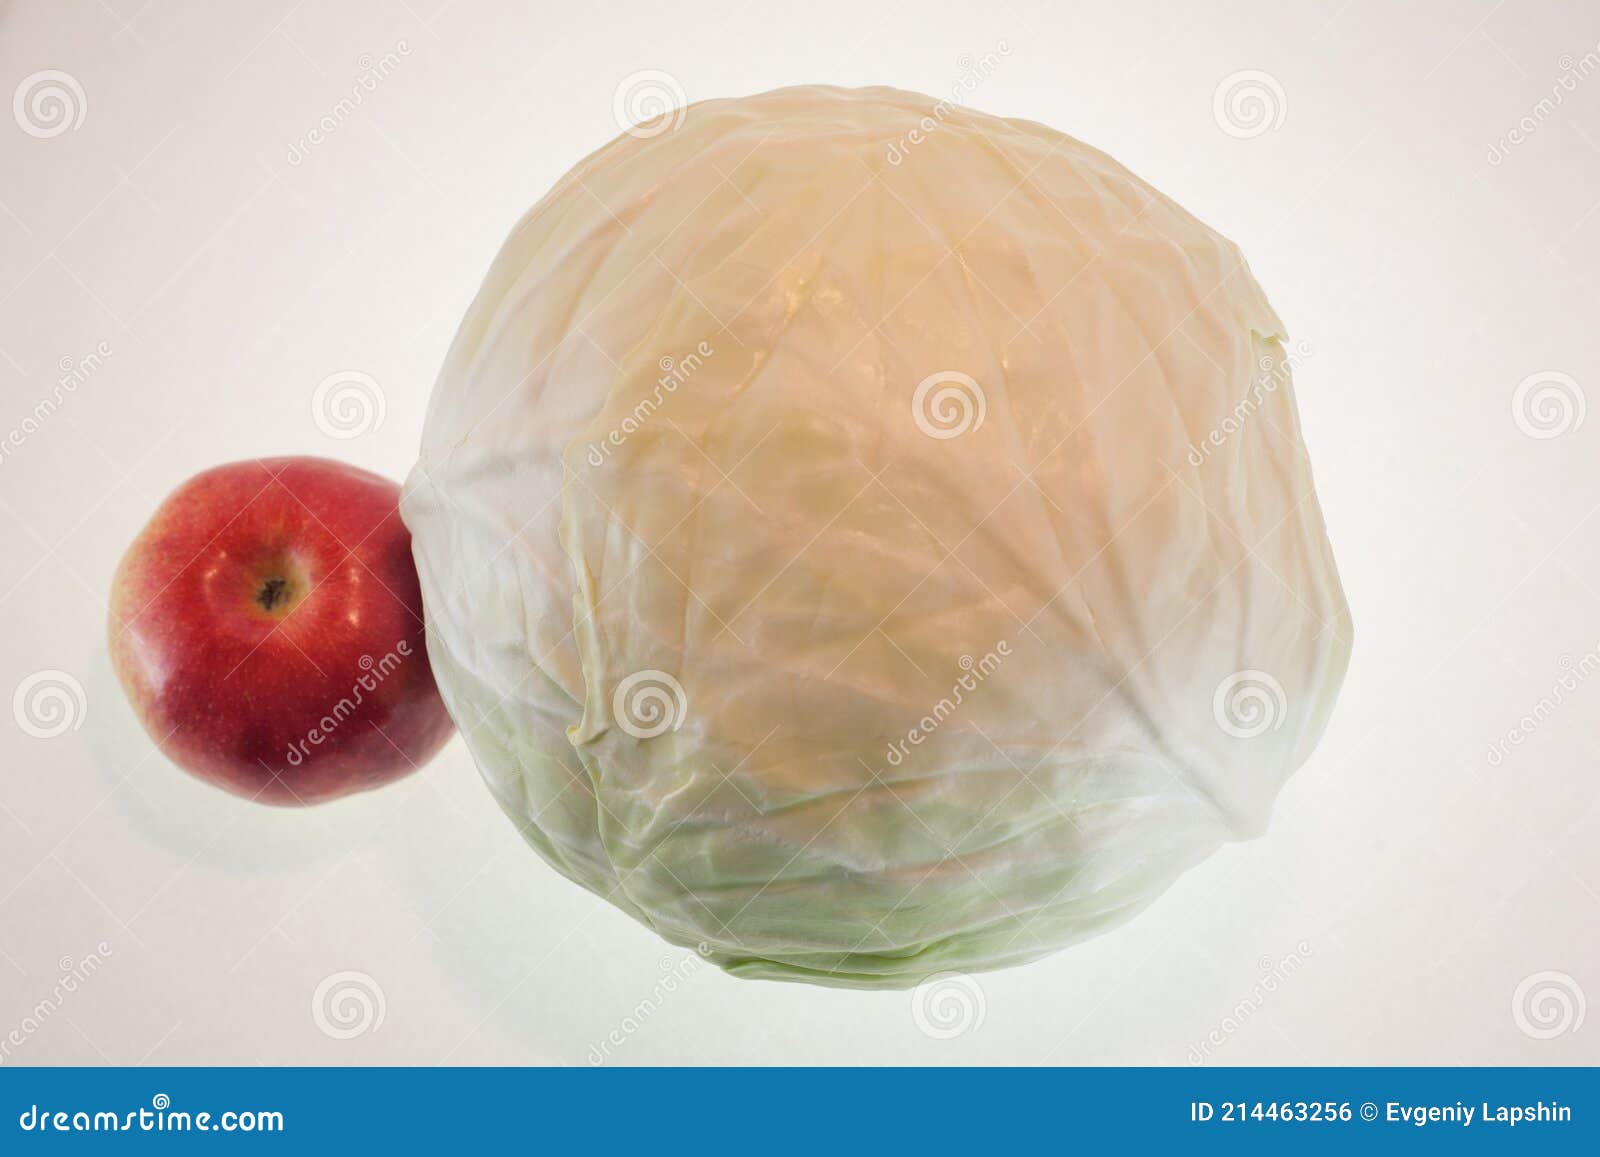 onions in a paper bag and an apple, white background, fruit and freshness, aphorisms written on paper